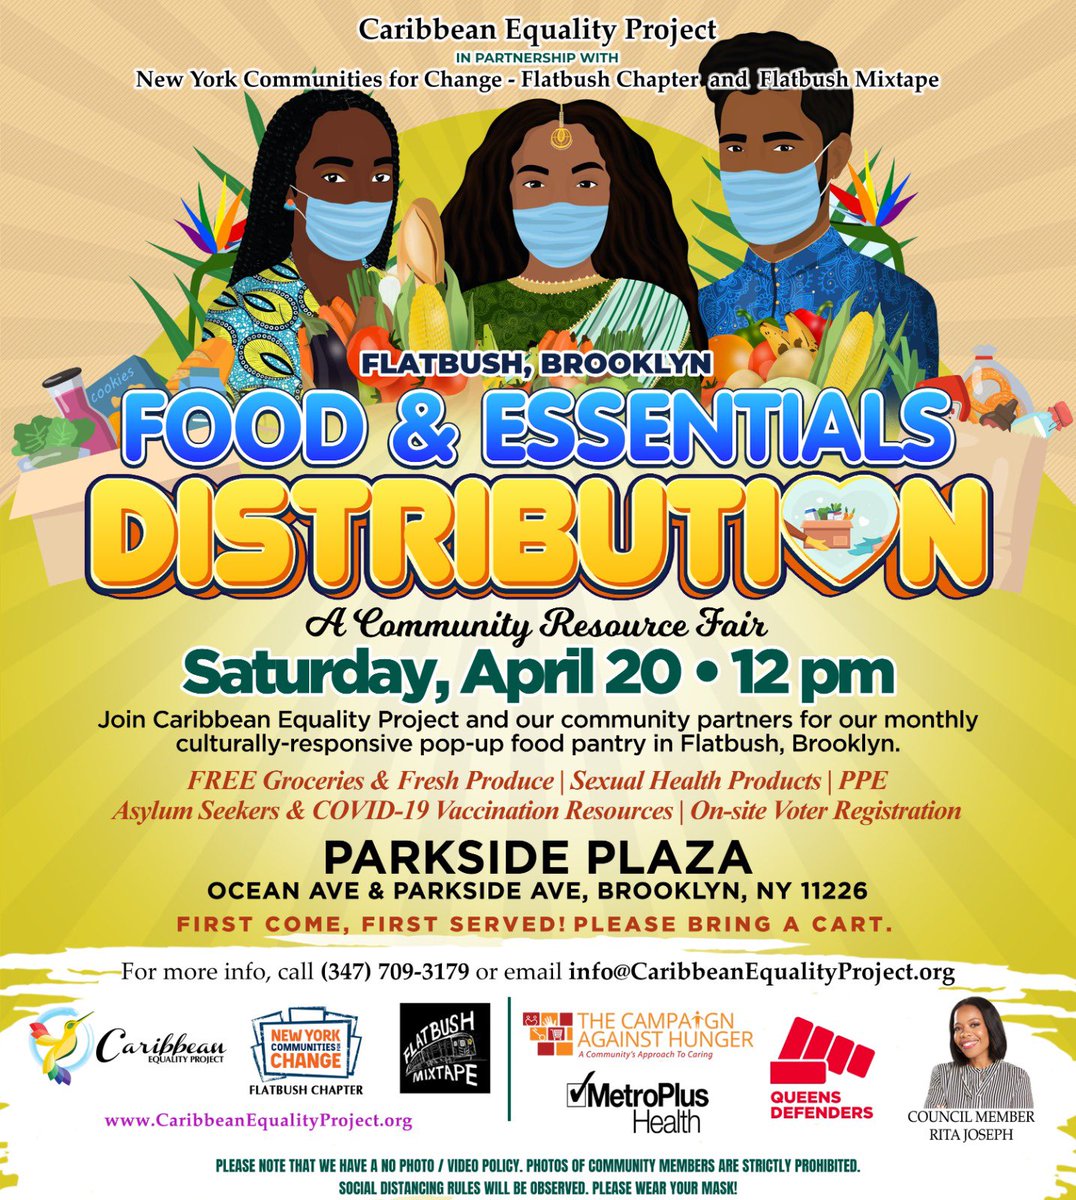 📣 TODAY, join us for our #EarthDay 🌍 centered culturally responsive pop-up food pantry in Flatbush, Brooklyn!🍎🌽🫑🍊🥔 ⏰🗓 Saturday, April 20 | 12 pm 📍Parkside Plaza- Ocean Ave & Parkside Ave, Brooklyn, NY 11226